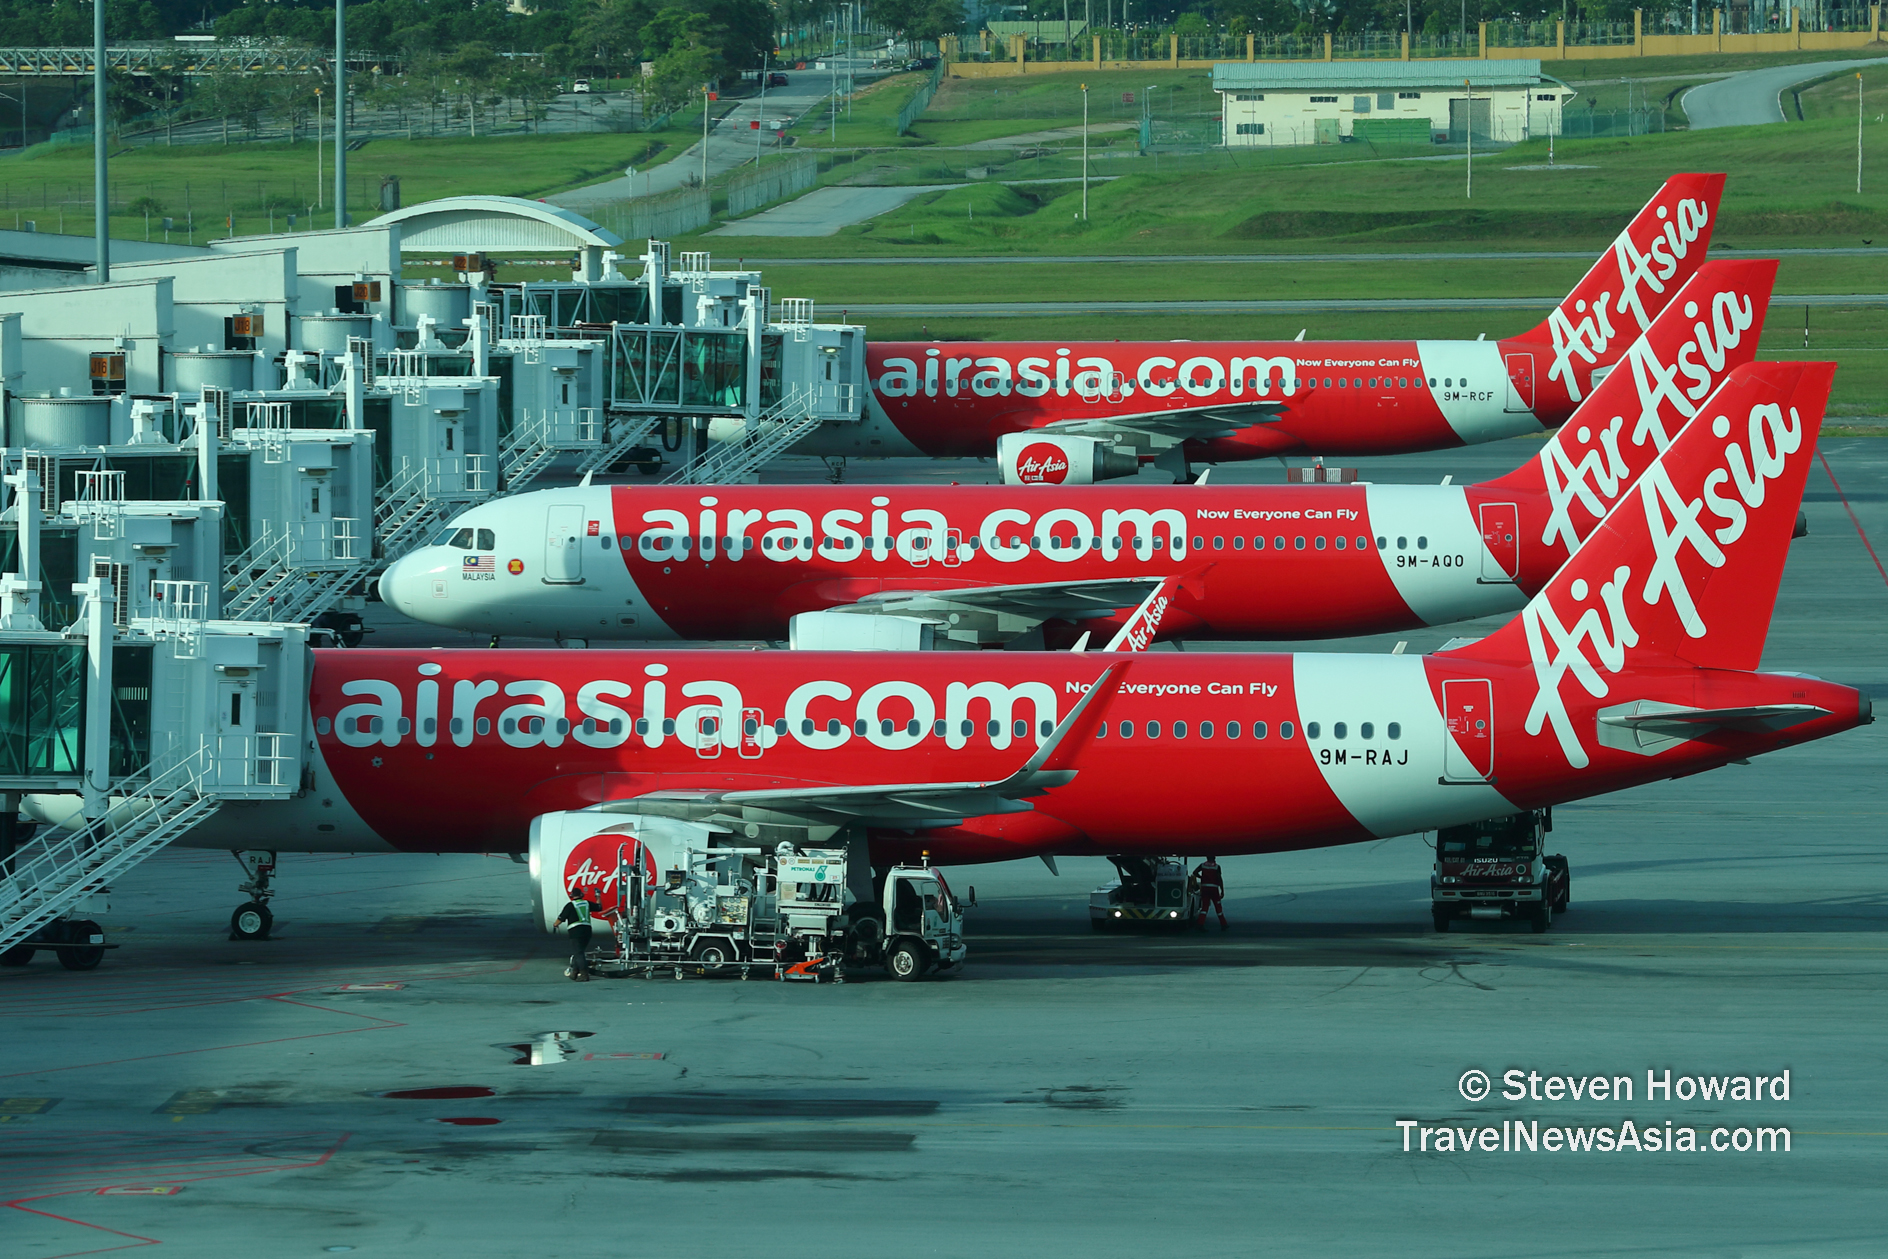 AirAsia Airbus A320 aircraft at klia2 in July 2023. Picture by Steven Howard of TravelNewsAsia.com Click to enlarge.